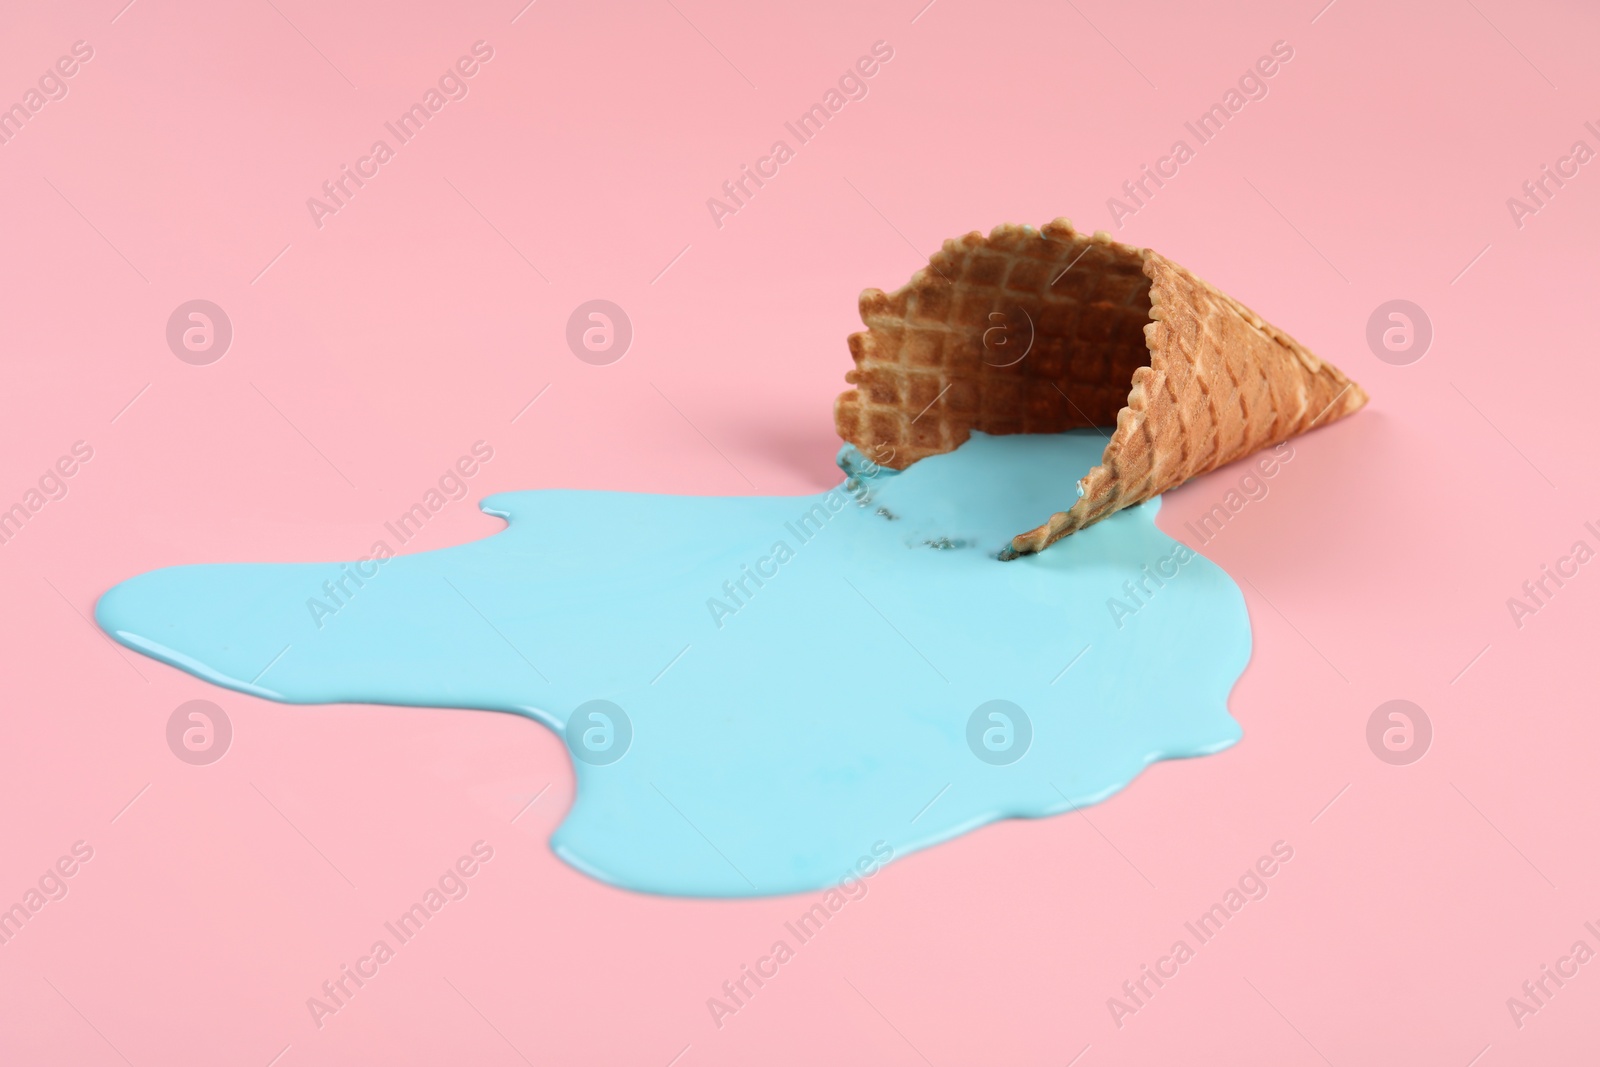 Photo of Melted ice cream and wafer cone on pink background, closeup